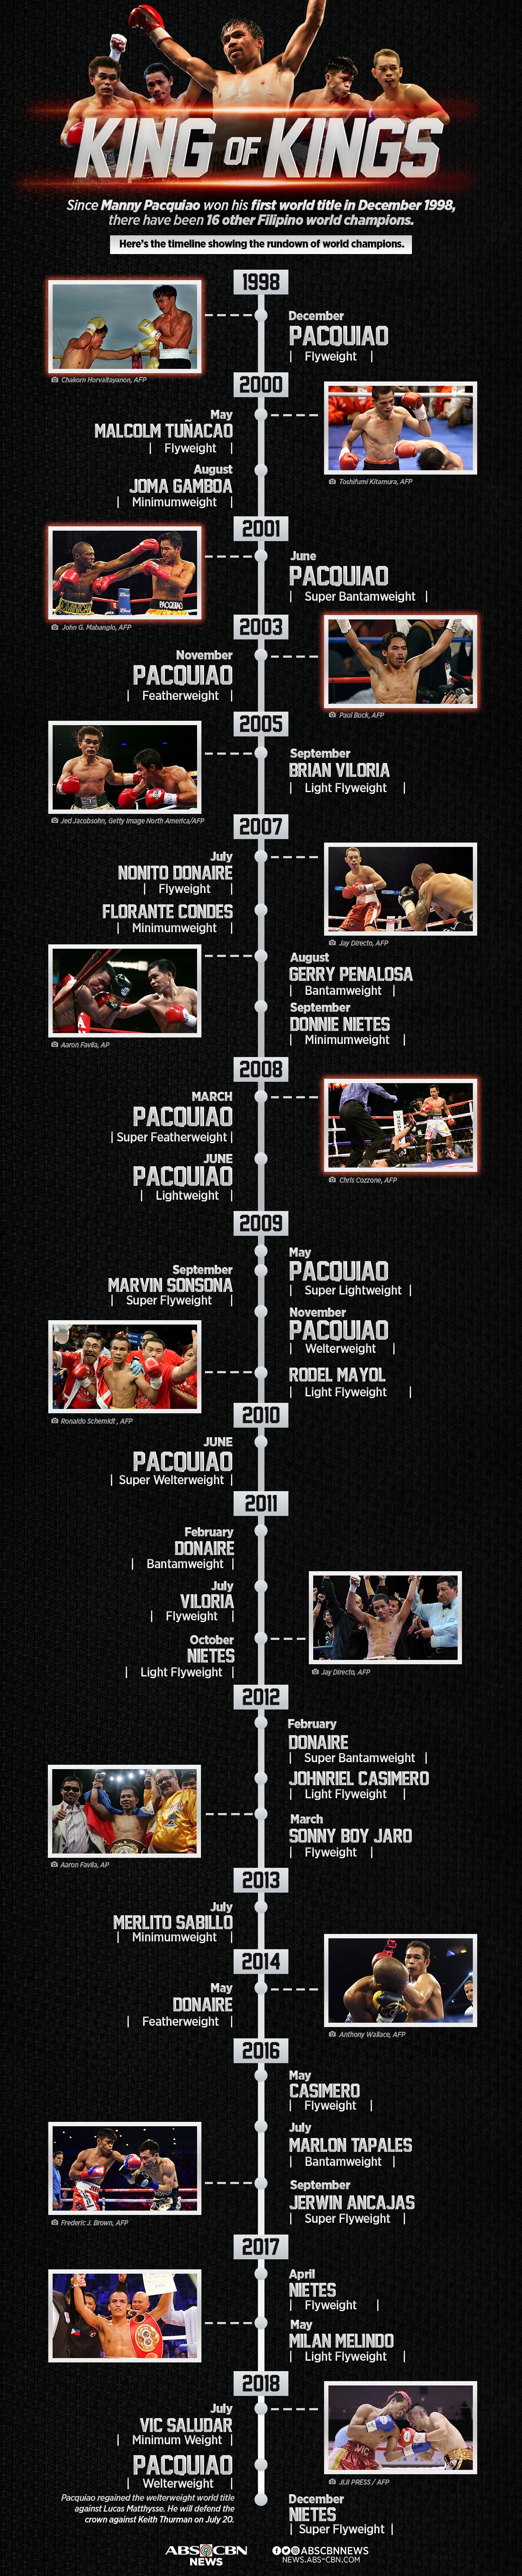 Pacquiao stands above all, as Pinoy champs have come and gone 1